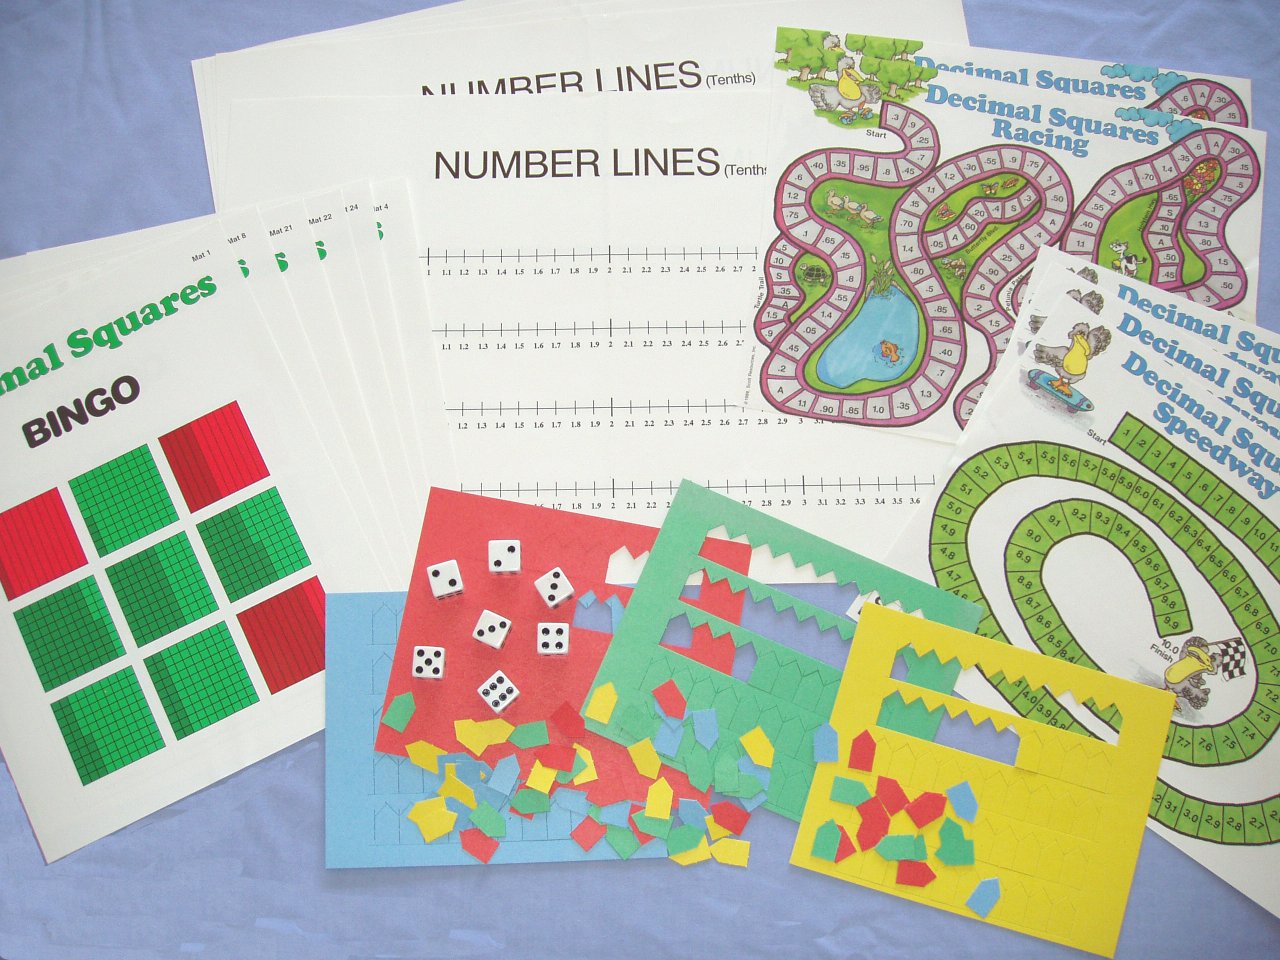 Decimal Squares Activity Mats Dice and Game Markers